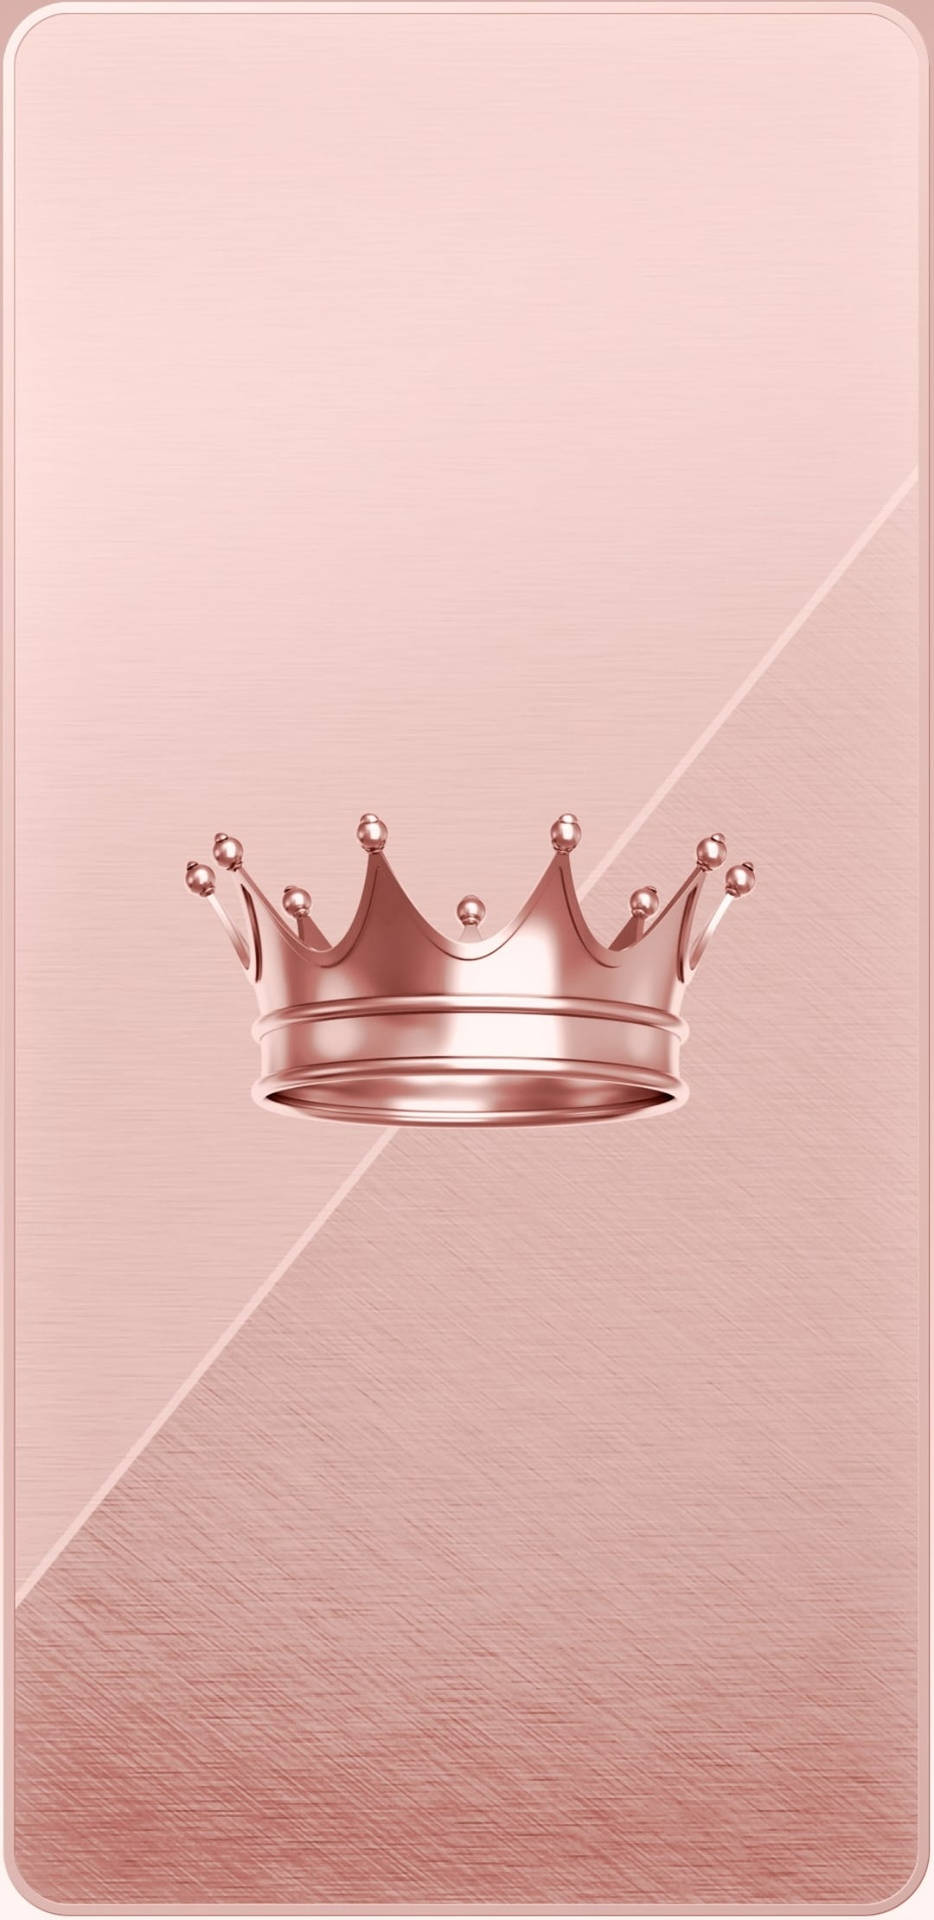 Download Queen Girly Rose Gold Crown Wallpaper